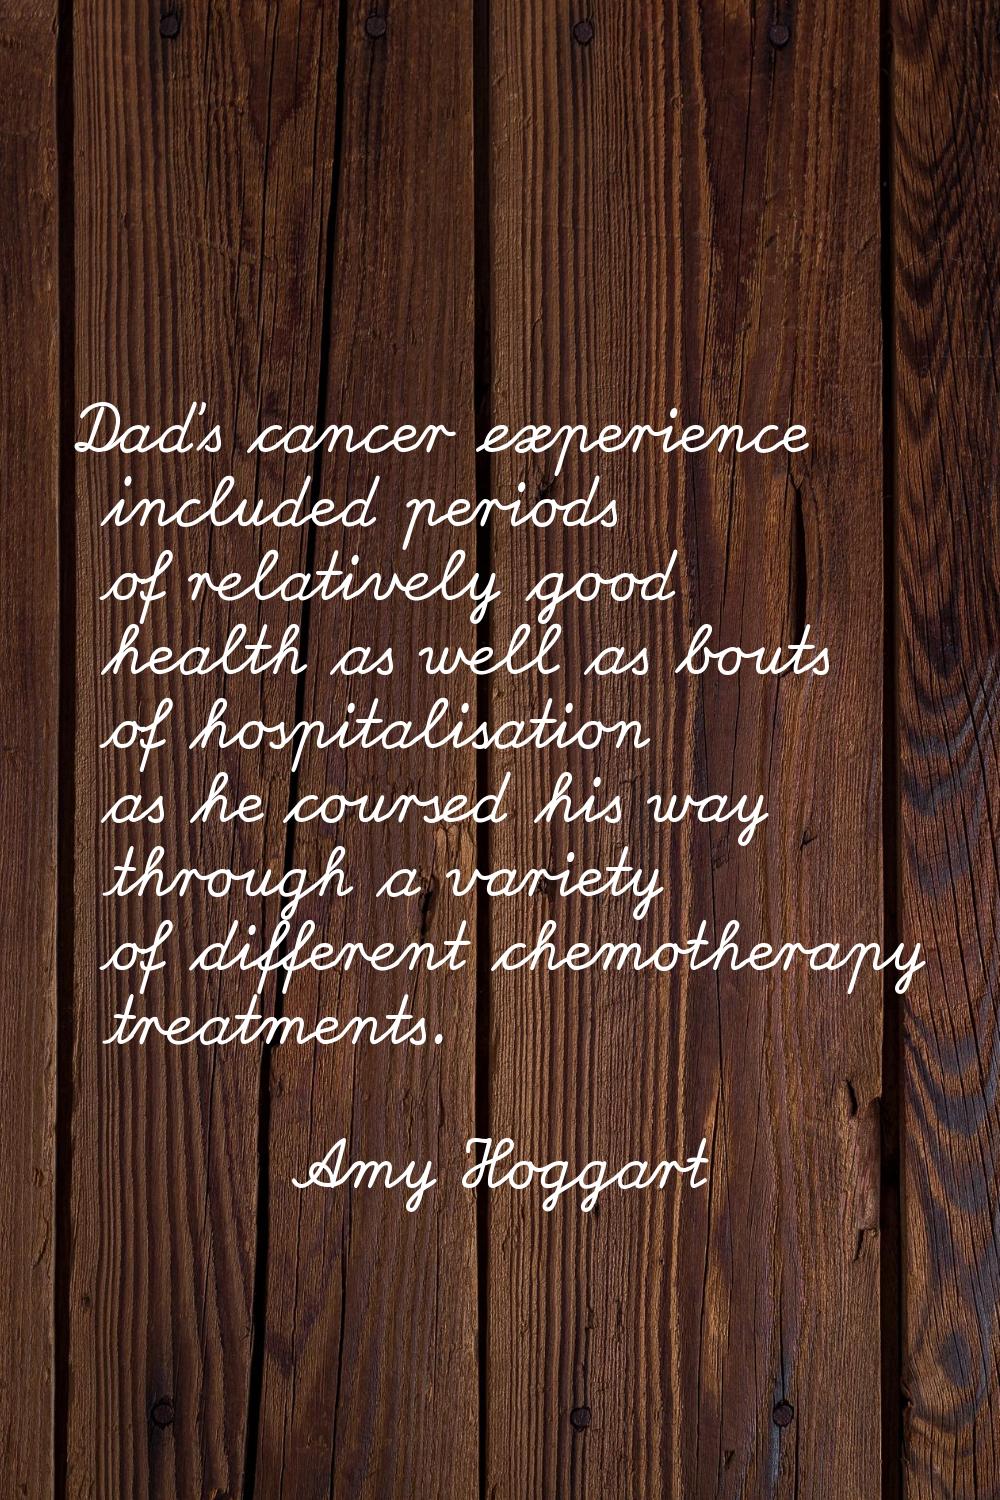 Dad's cancer experience included periods of relatively good health as well as bouts of hospitalisat